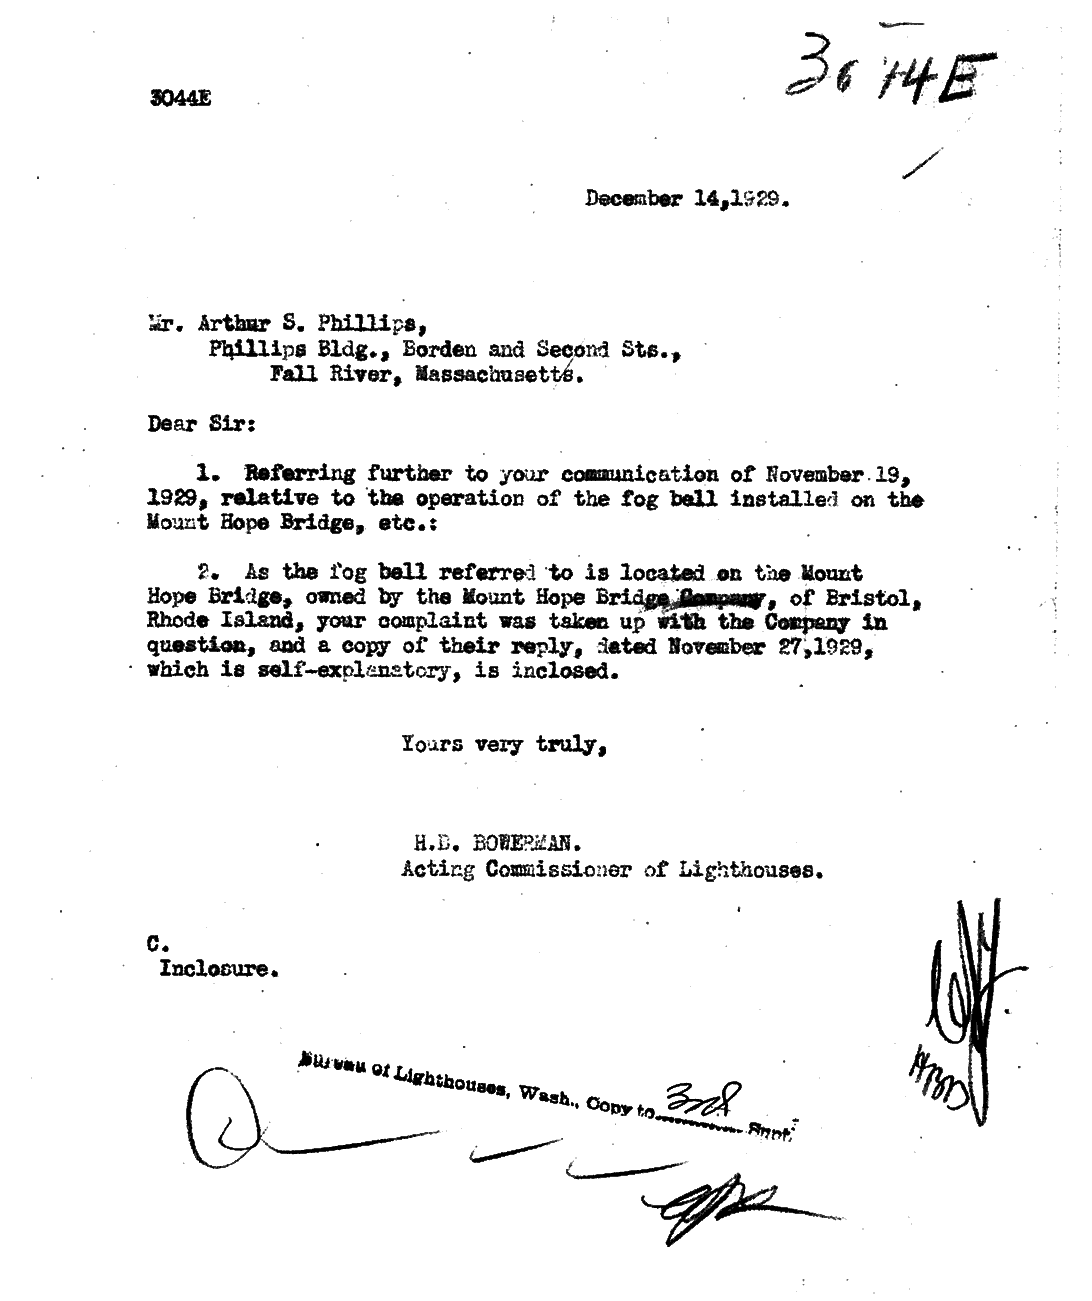 Lighthouse Service Letter To Mr. Philips About Fog Bell on Mount Hope Bridge